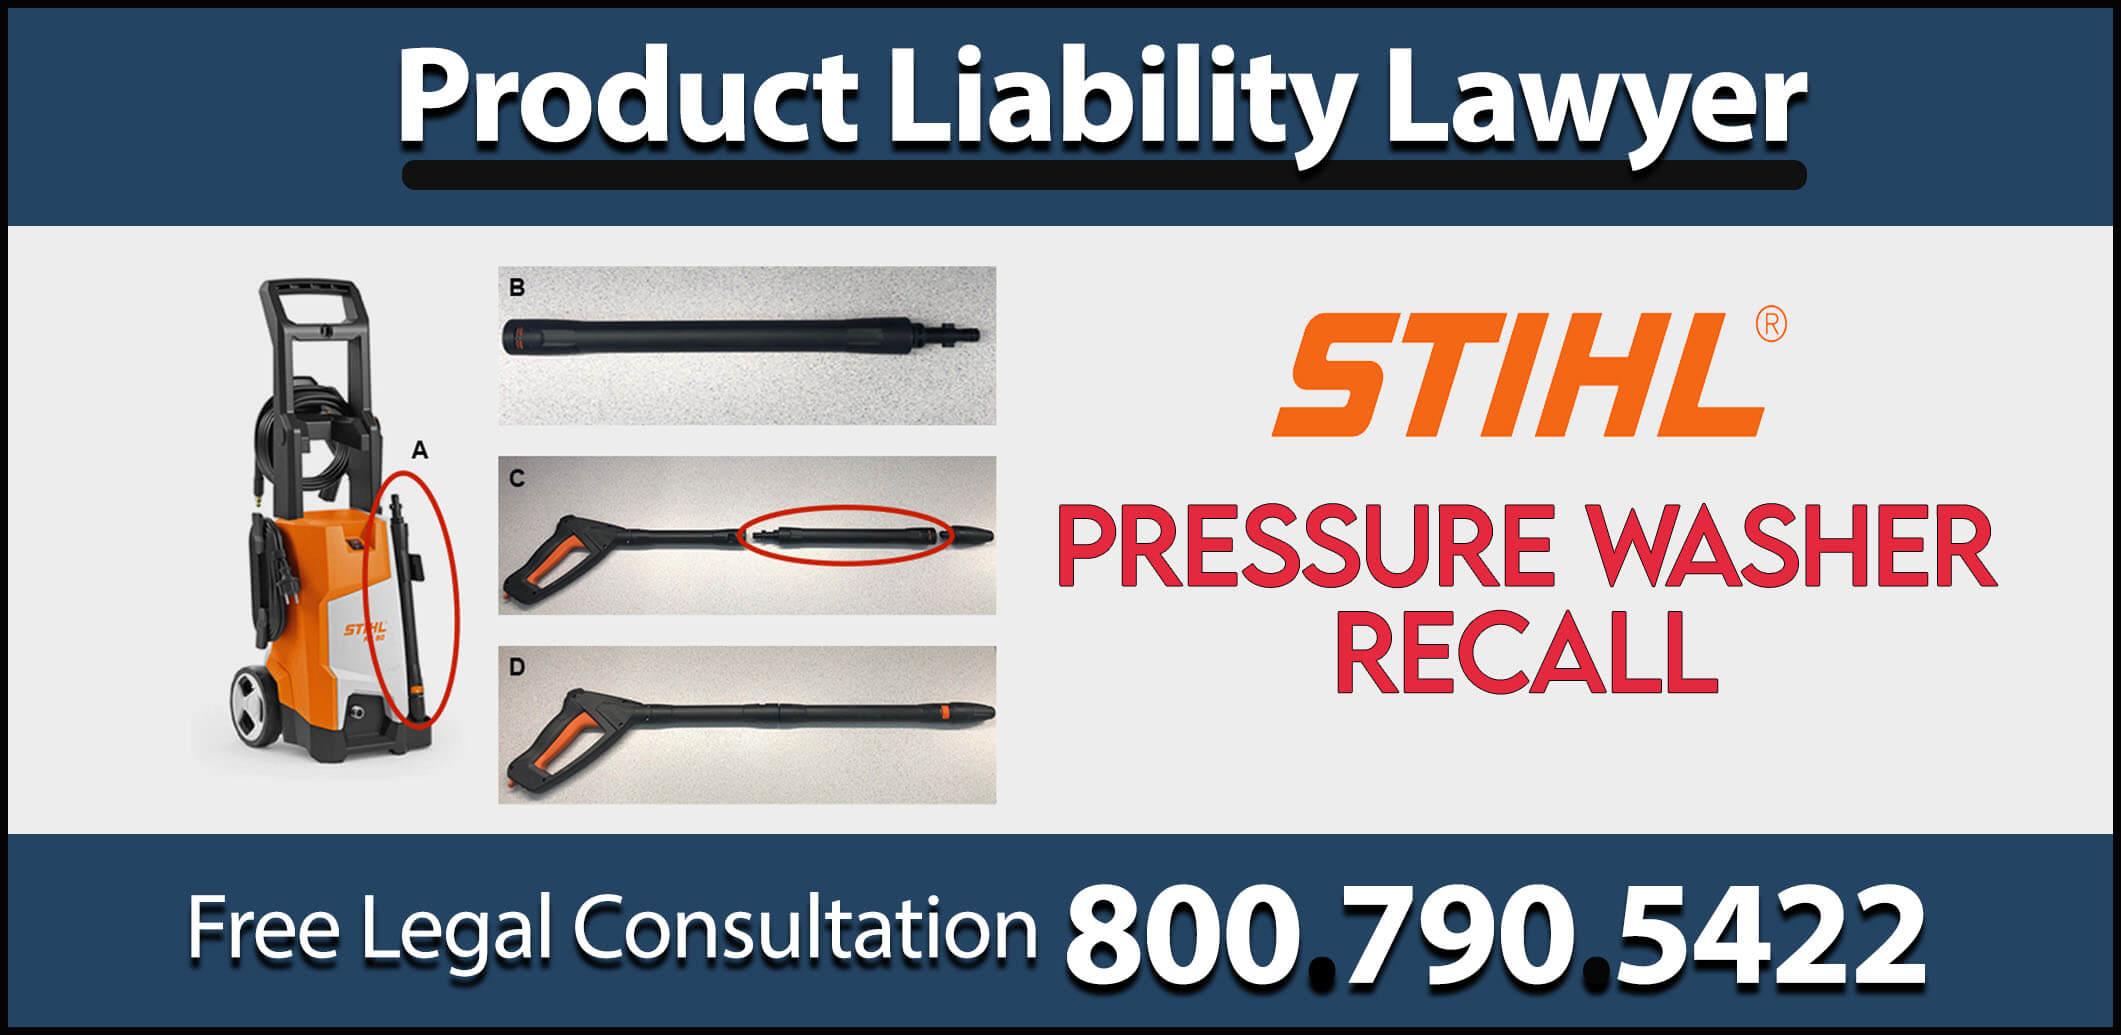 stihl pressure washer recall nozzle product liability attorney laceration wound abrasion sue lawyer